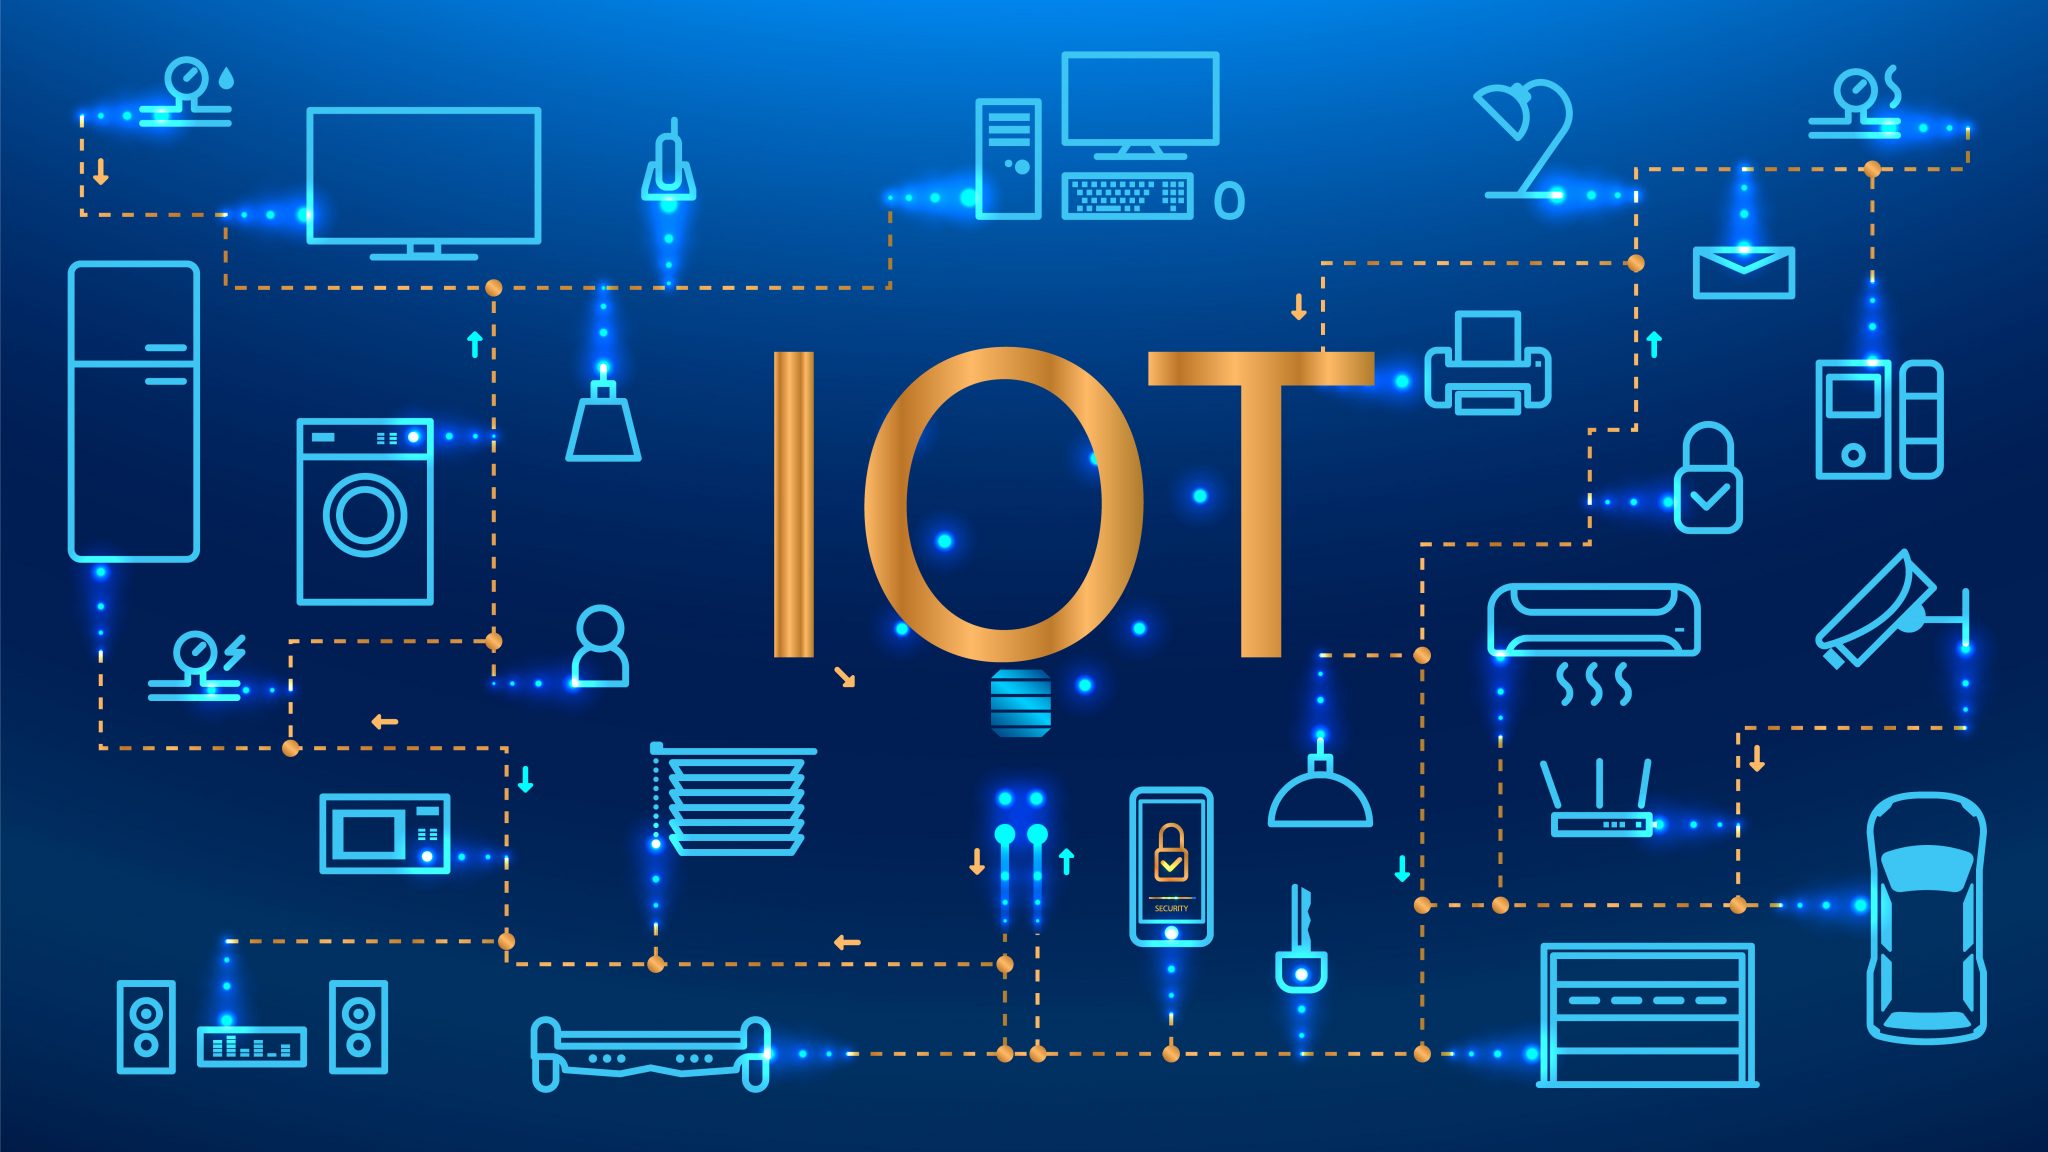 Build An IoT Application In An Age Of Smart Devices